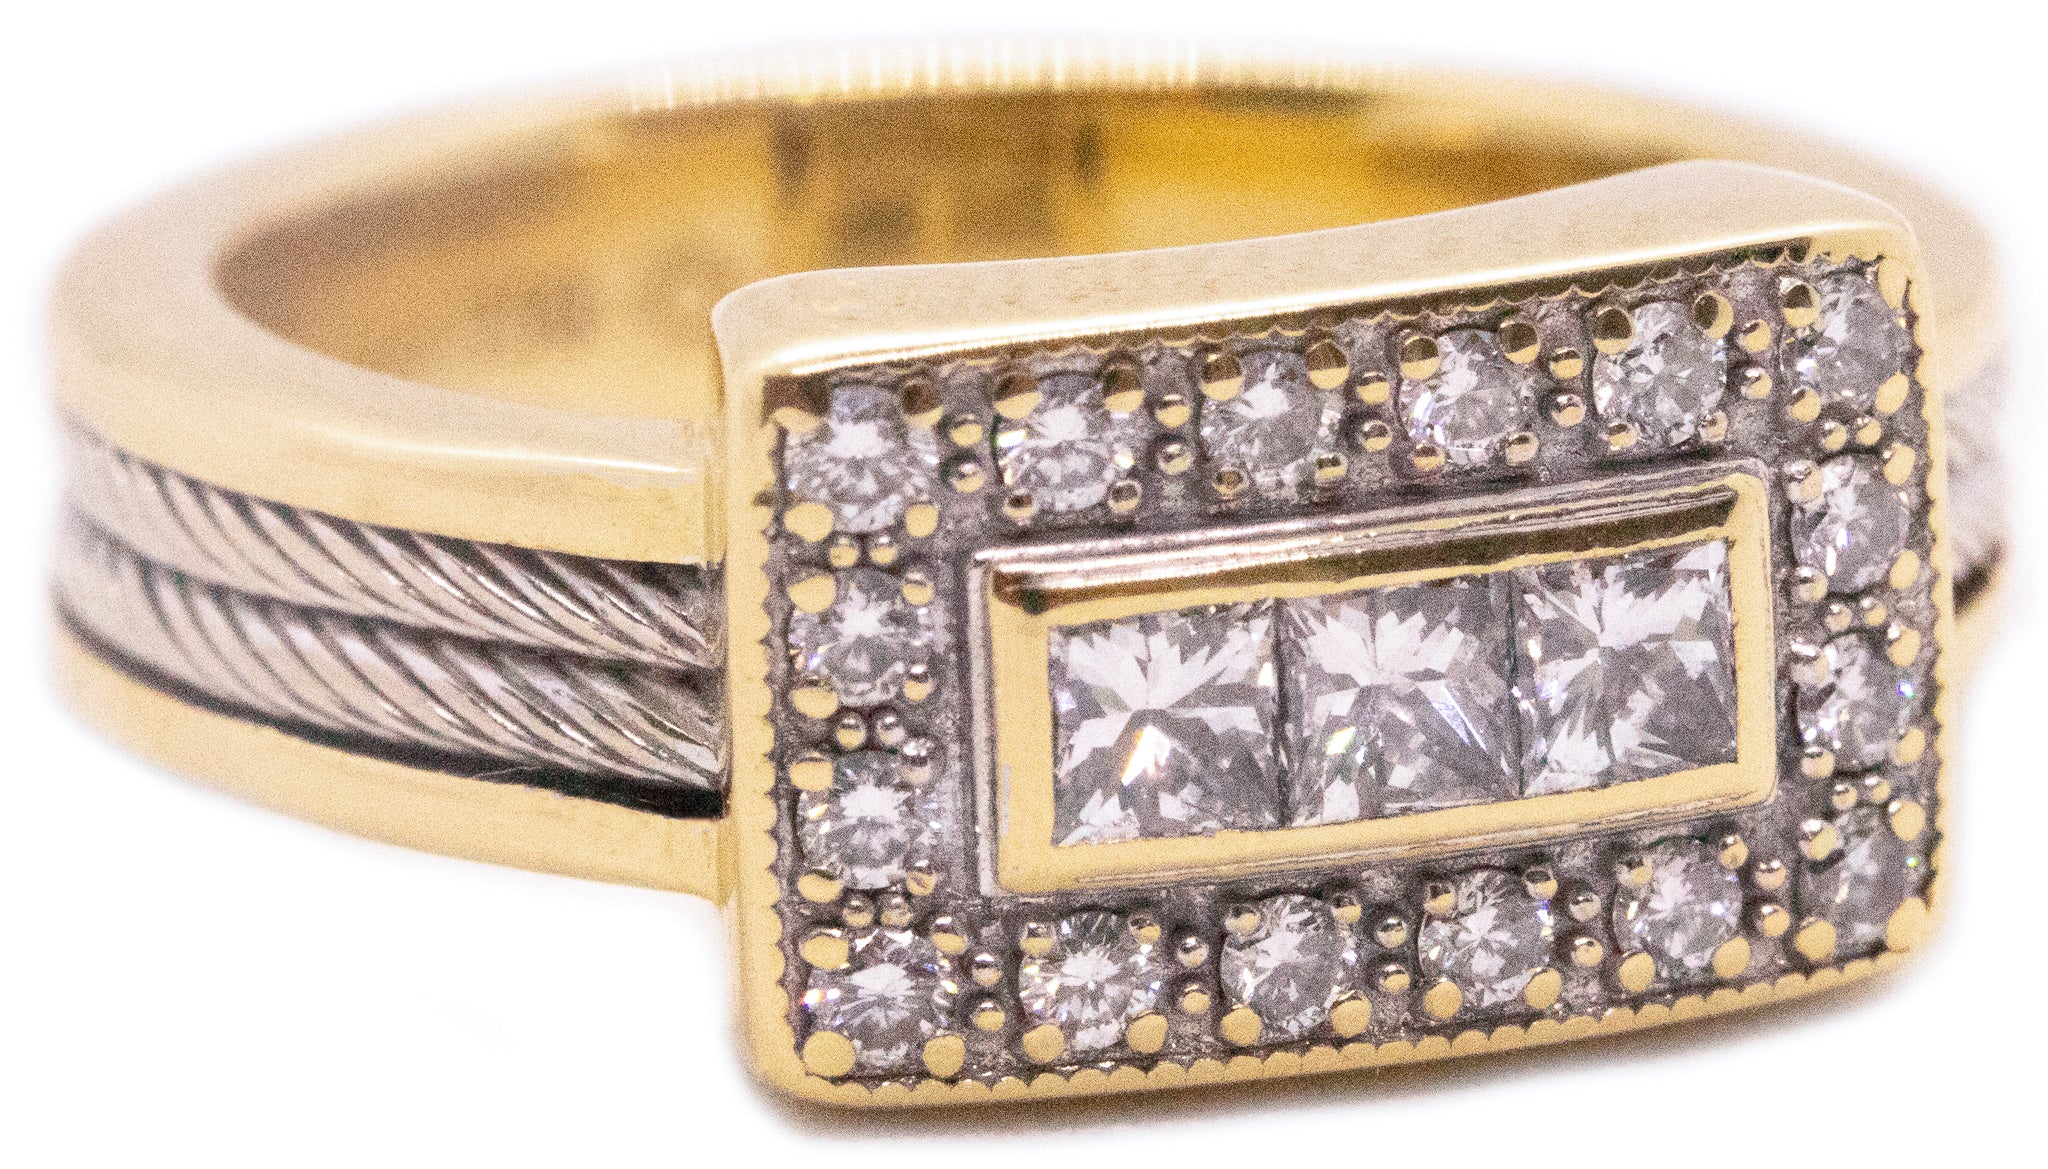 PHILLIPE CHARRIOL DIAMONDS 18 KT GOLD CABLE RING